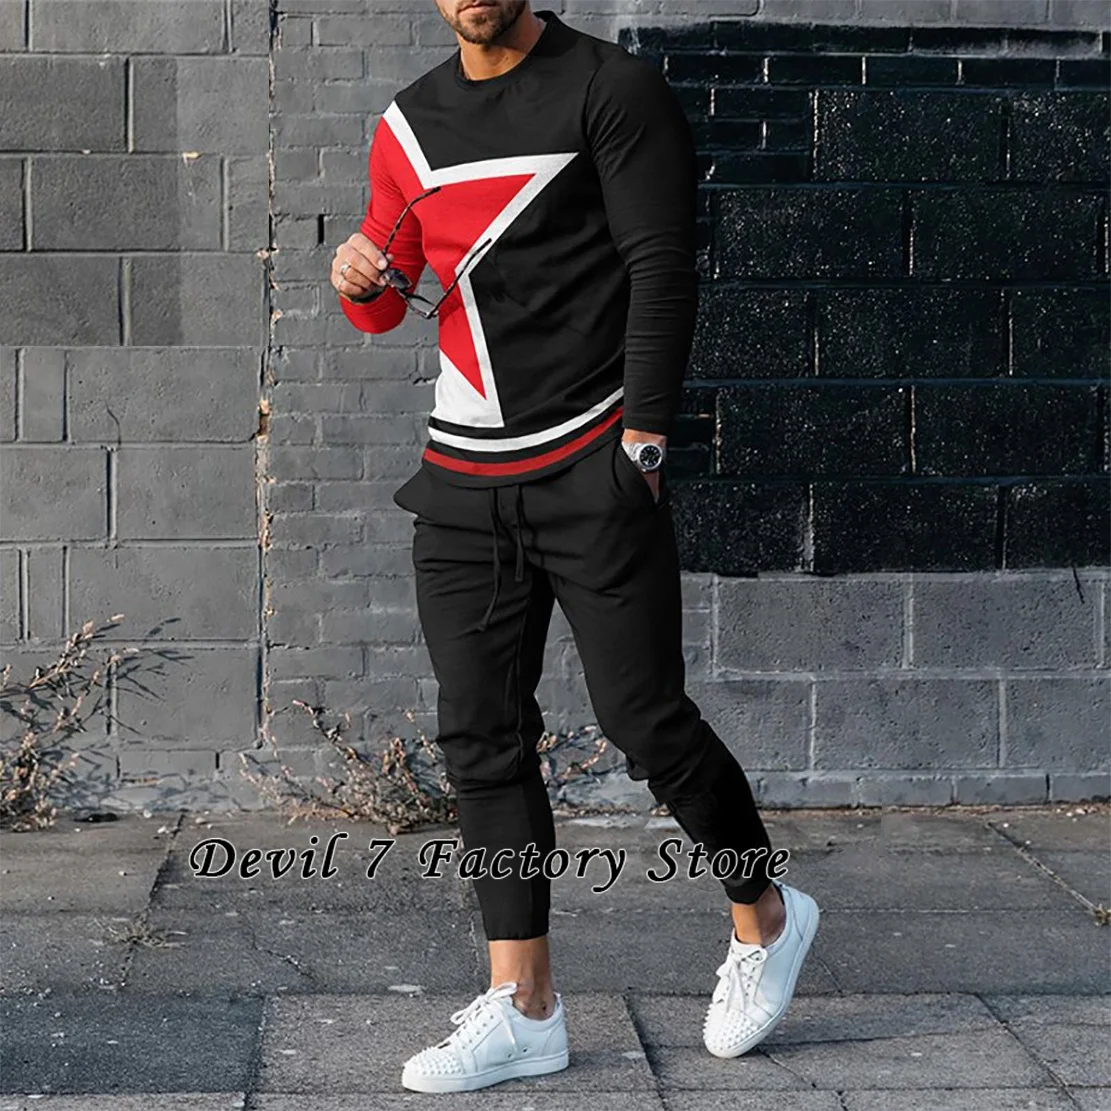 New Men's T Shirt Long Sleeve Oversized Sweatshirt Pants Male Sets Fashion Trousers Tracksuits 2 Piece Outfits Trend 3D Clothing